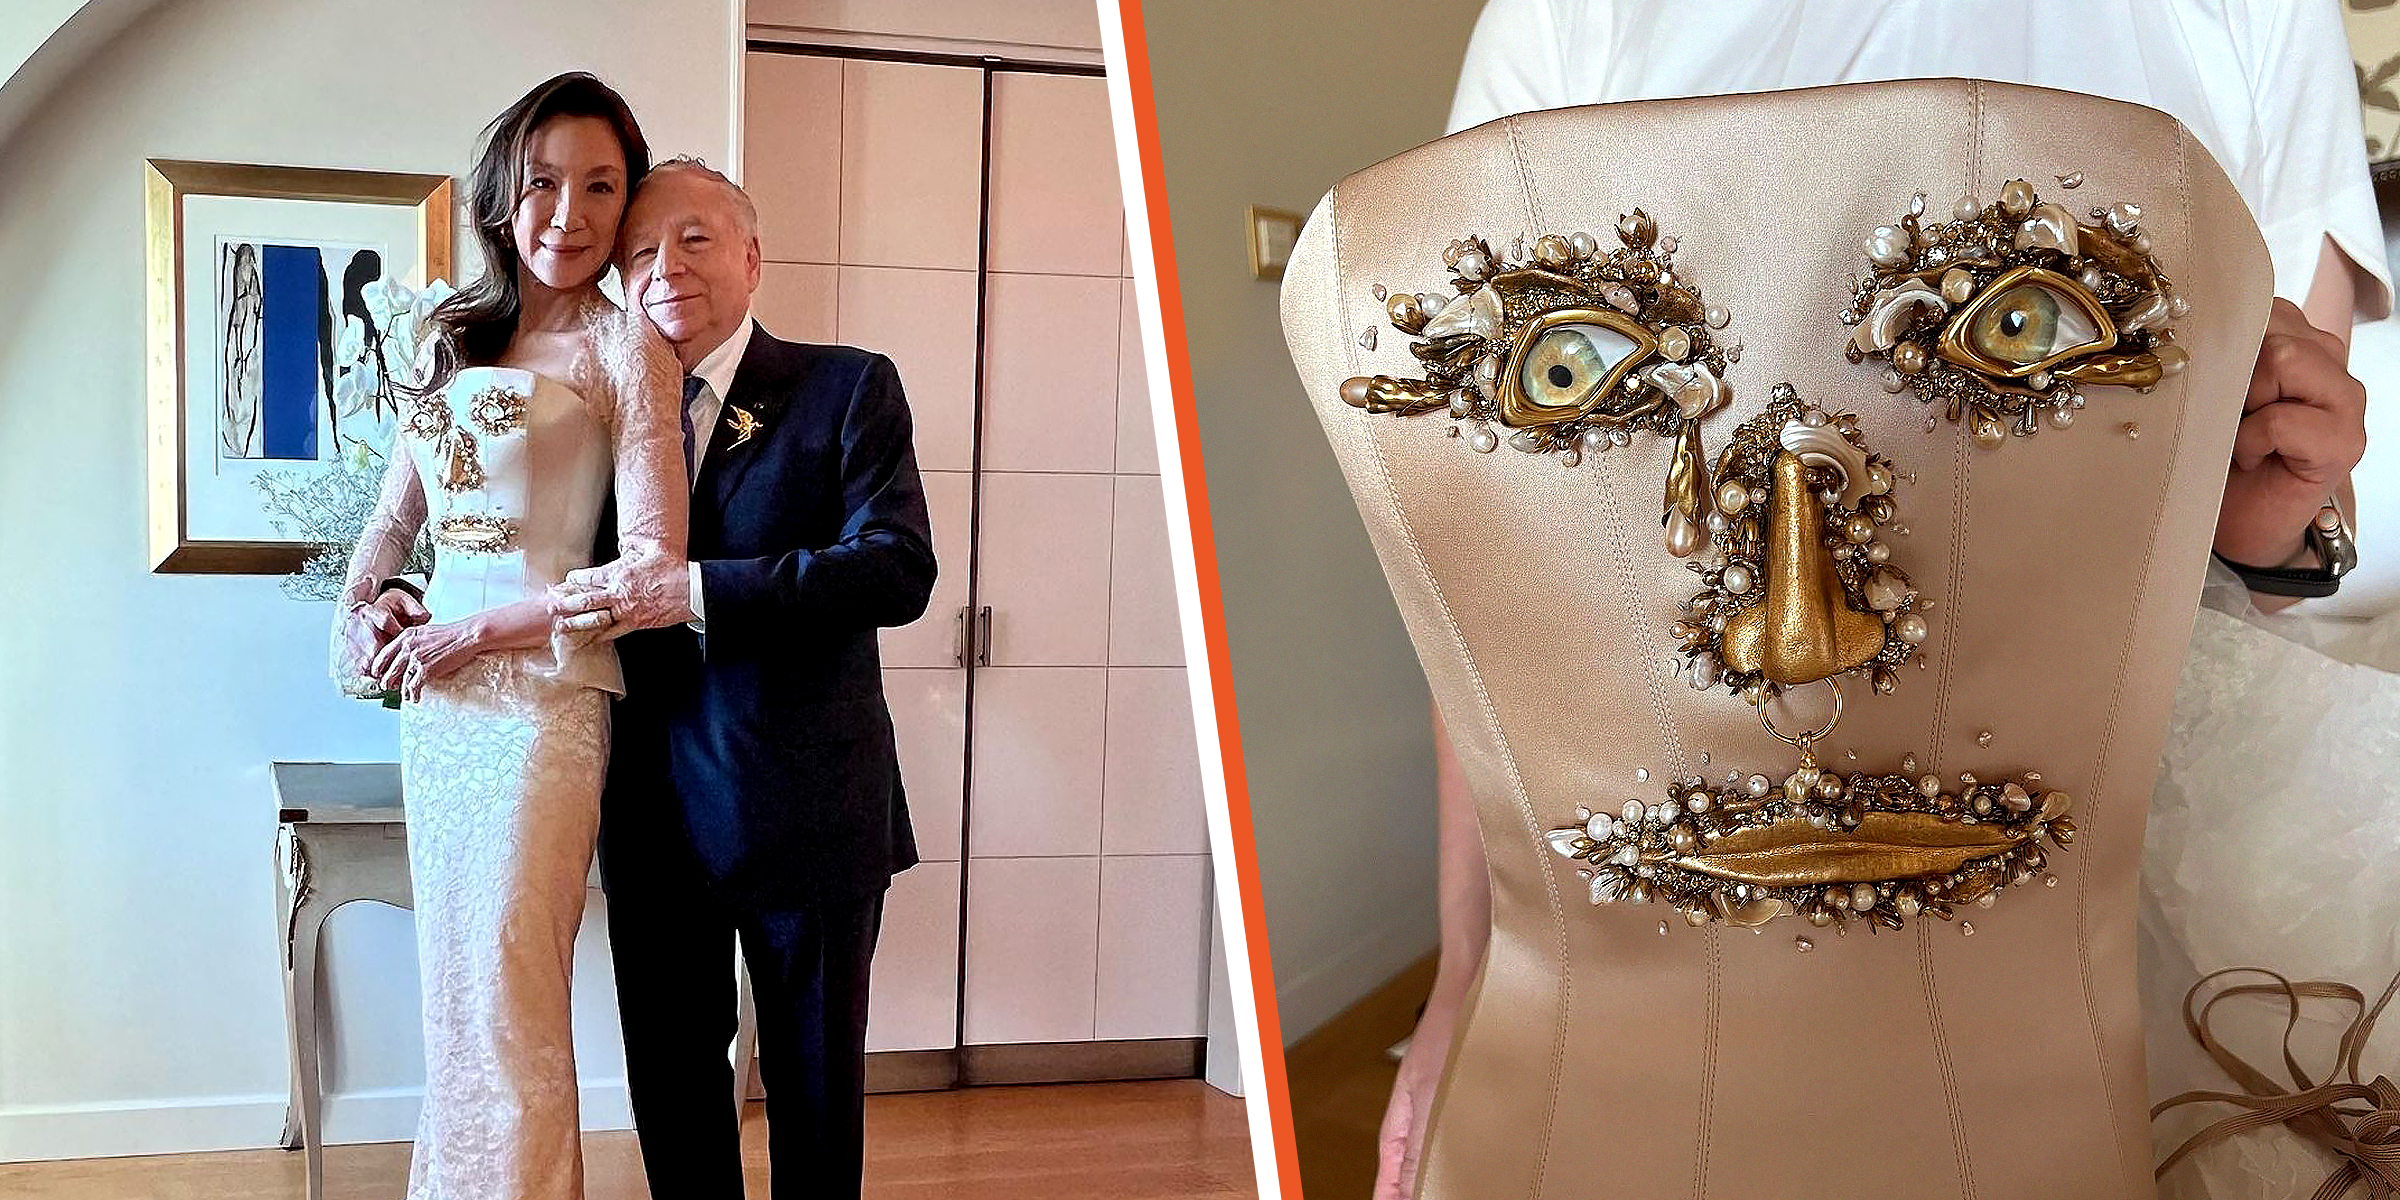 Michelle Yeoh and Jean Todt | The Schiaparelli Face of Happiness dress. | Source: Instagram/michelleyeoh_official